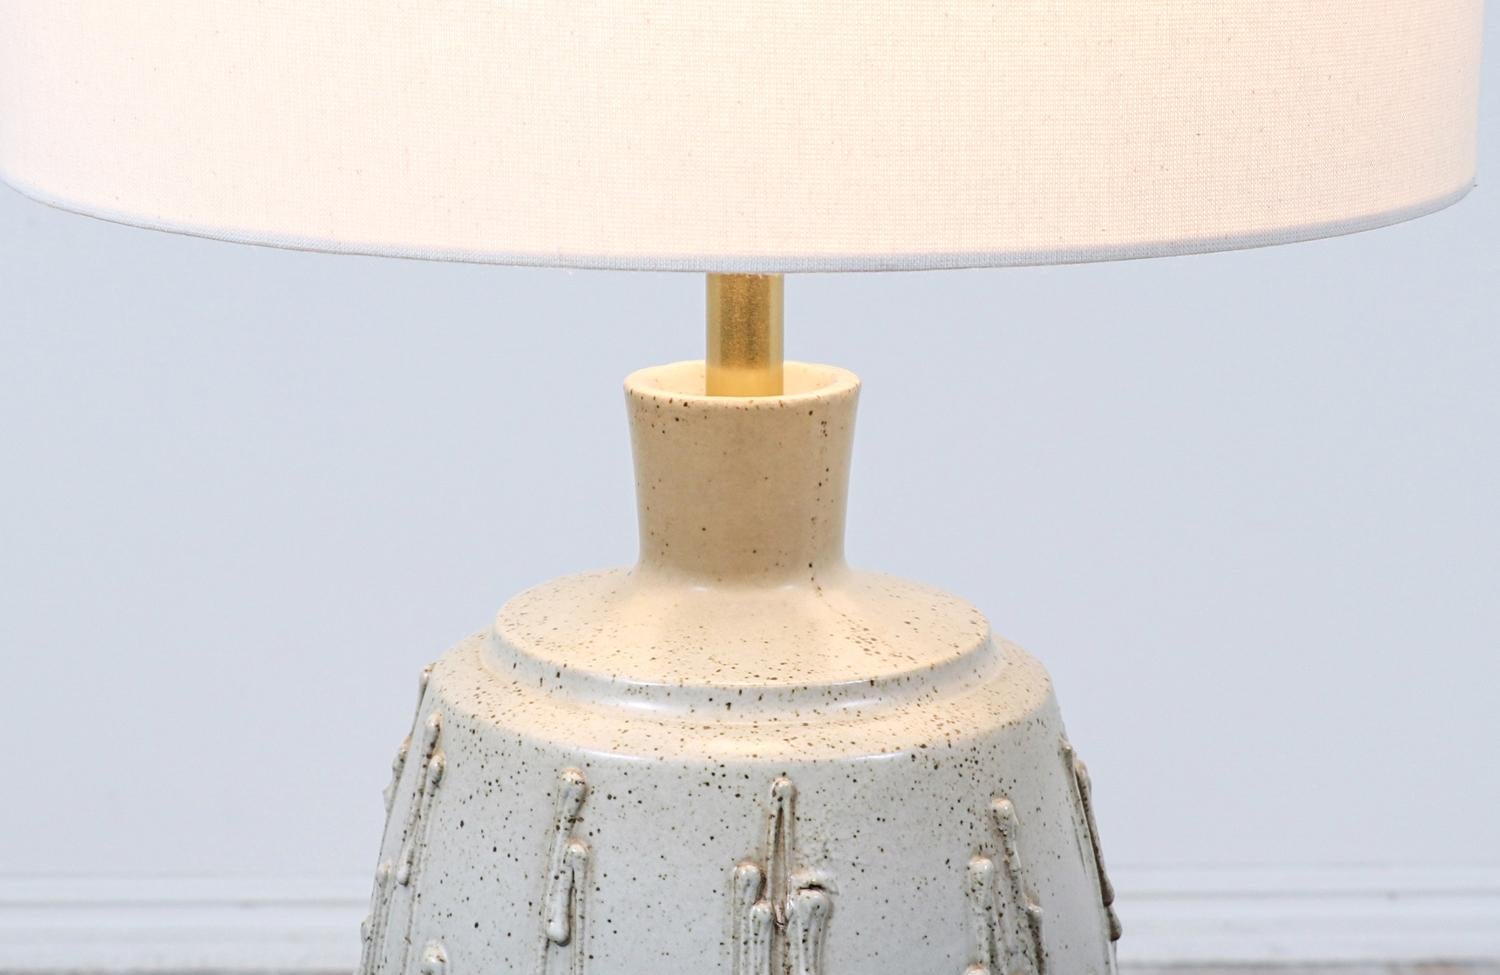 David Cressey Glazed Drip Texture Ceramic Table Lamp for Architectural Pottery In Excellent Condition For Sale In Los Angeles, CA